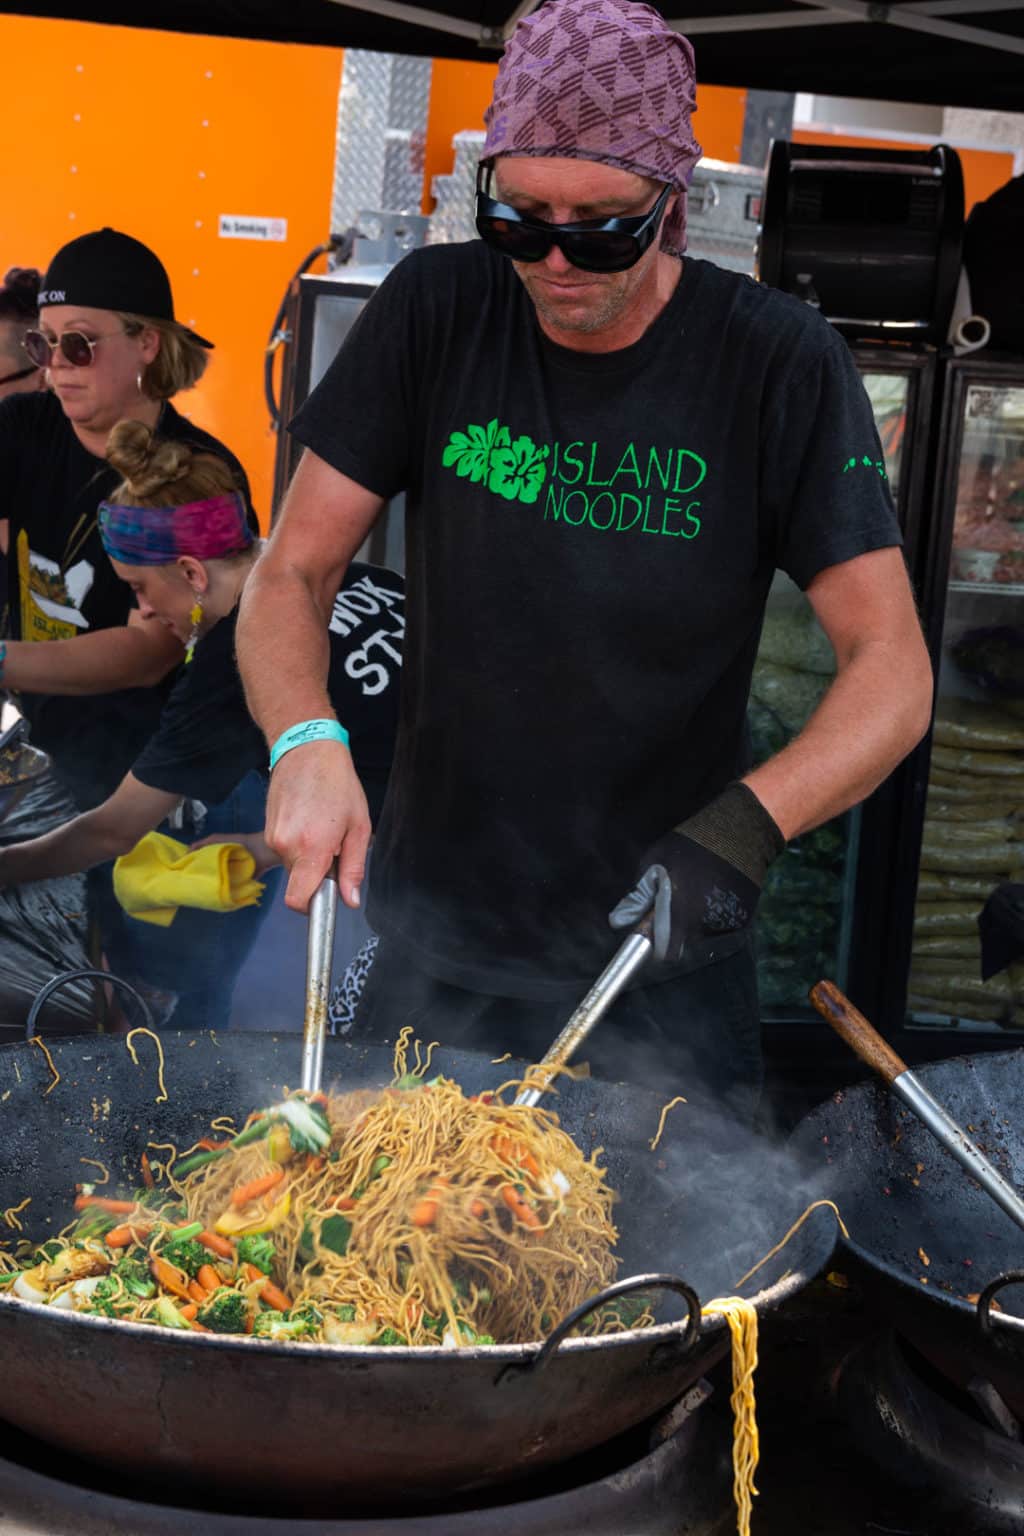 A vendor cooking noodles and vegetables in a large wok while wearing goggles, a purple bandana on their head, and a shirt that says "Island Noodles."